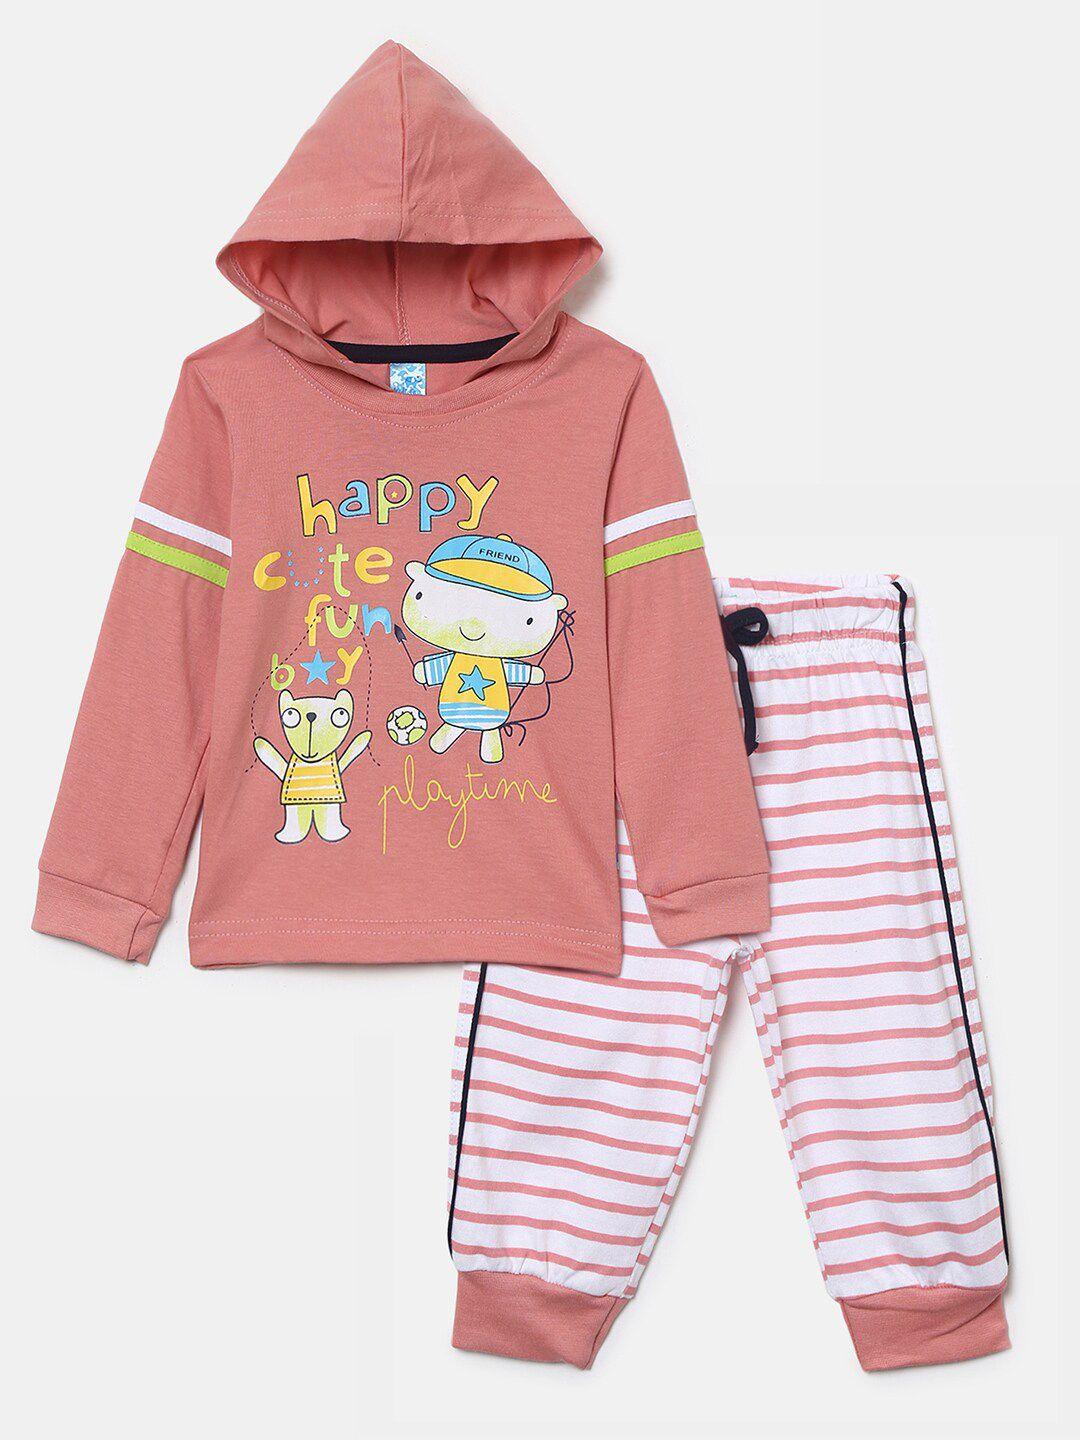 v-mart kids coral & white printed pure cotton t-shirt with pyjama